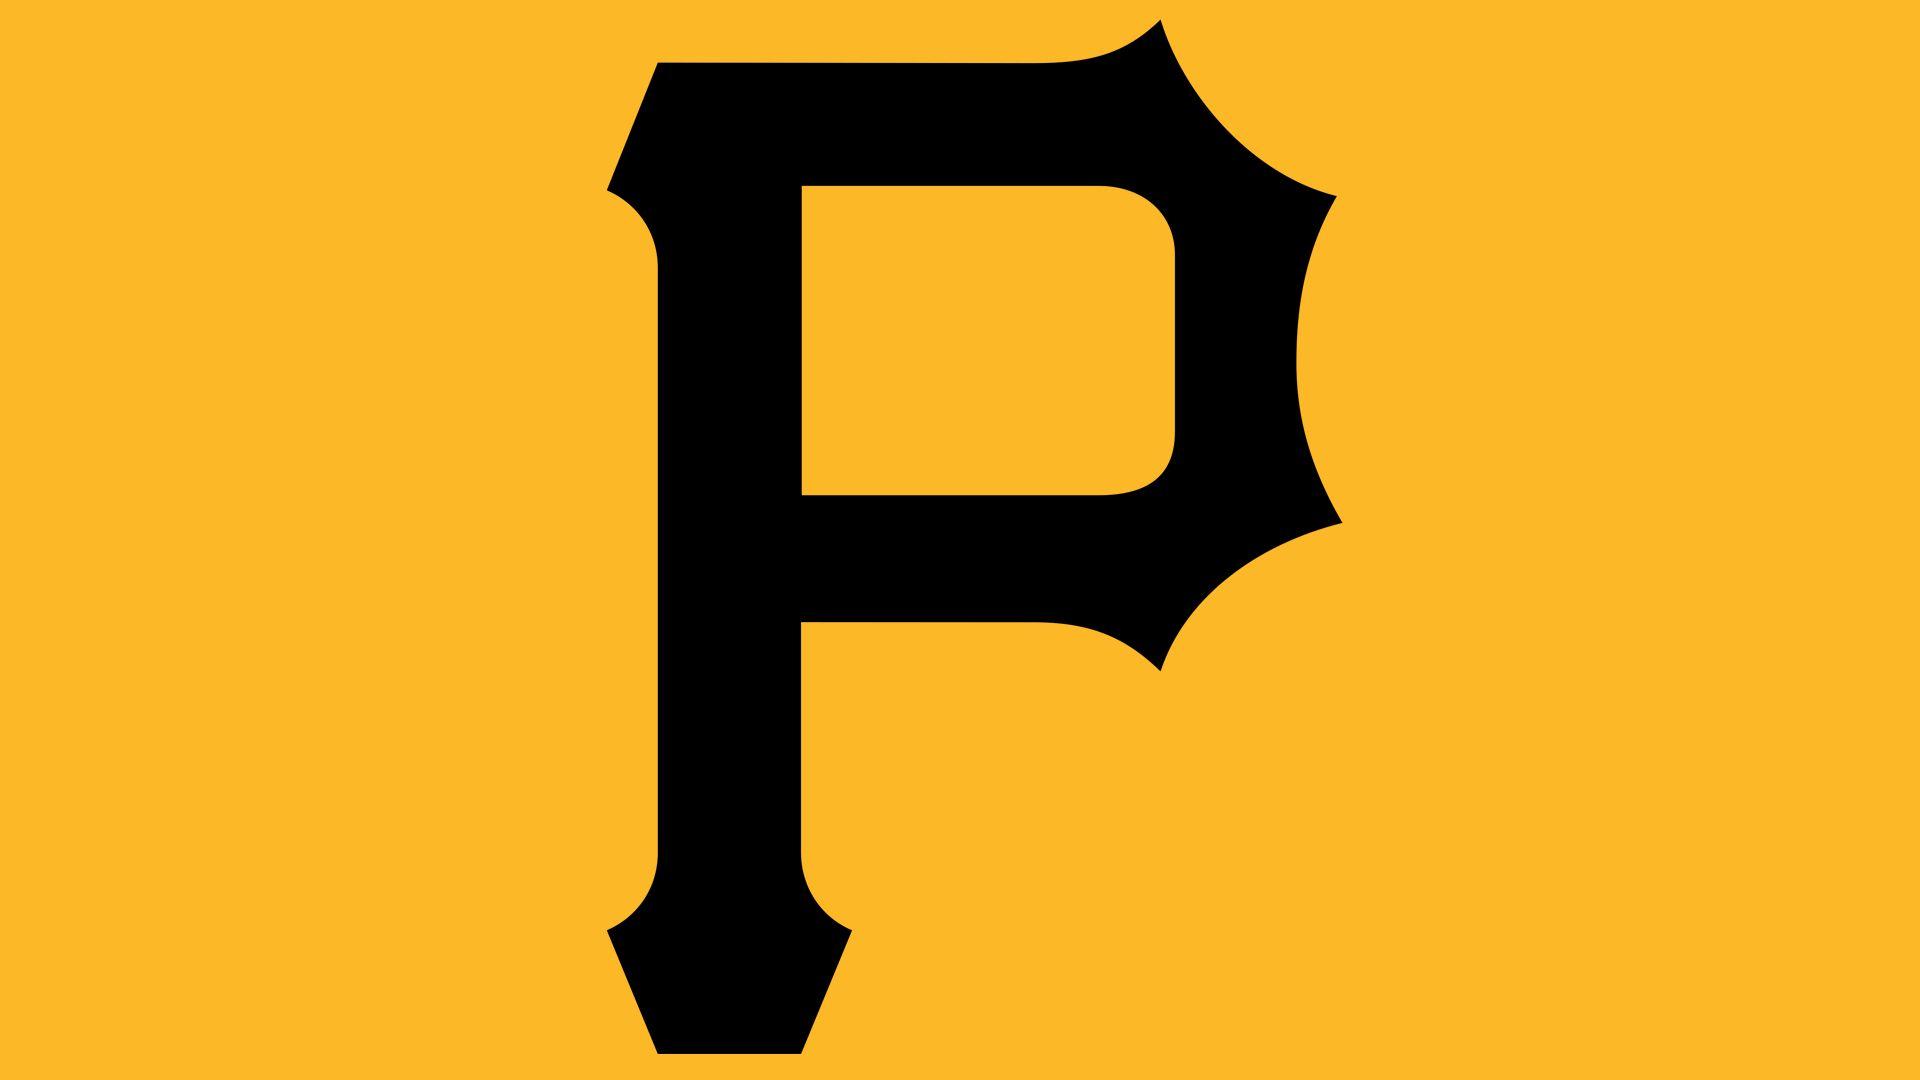 Pittsburgh Logo - Meaning Pittsburgh Pirates logo and symbol | history and evolution